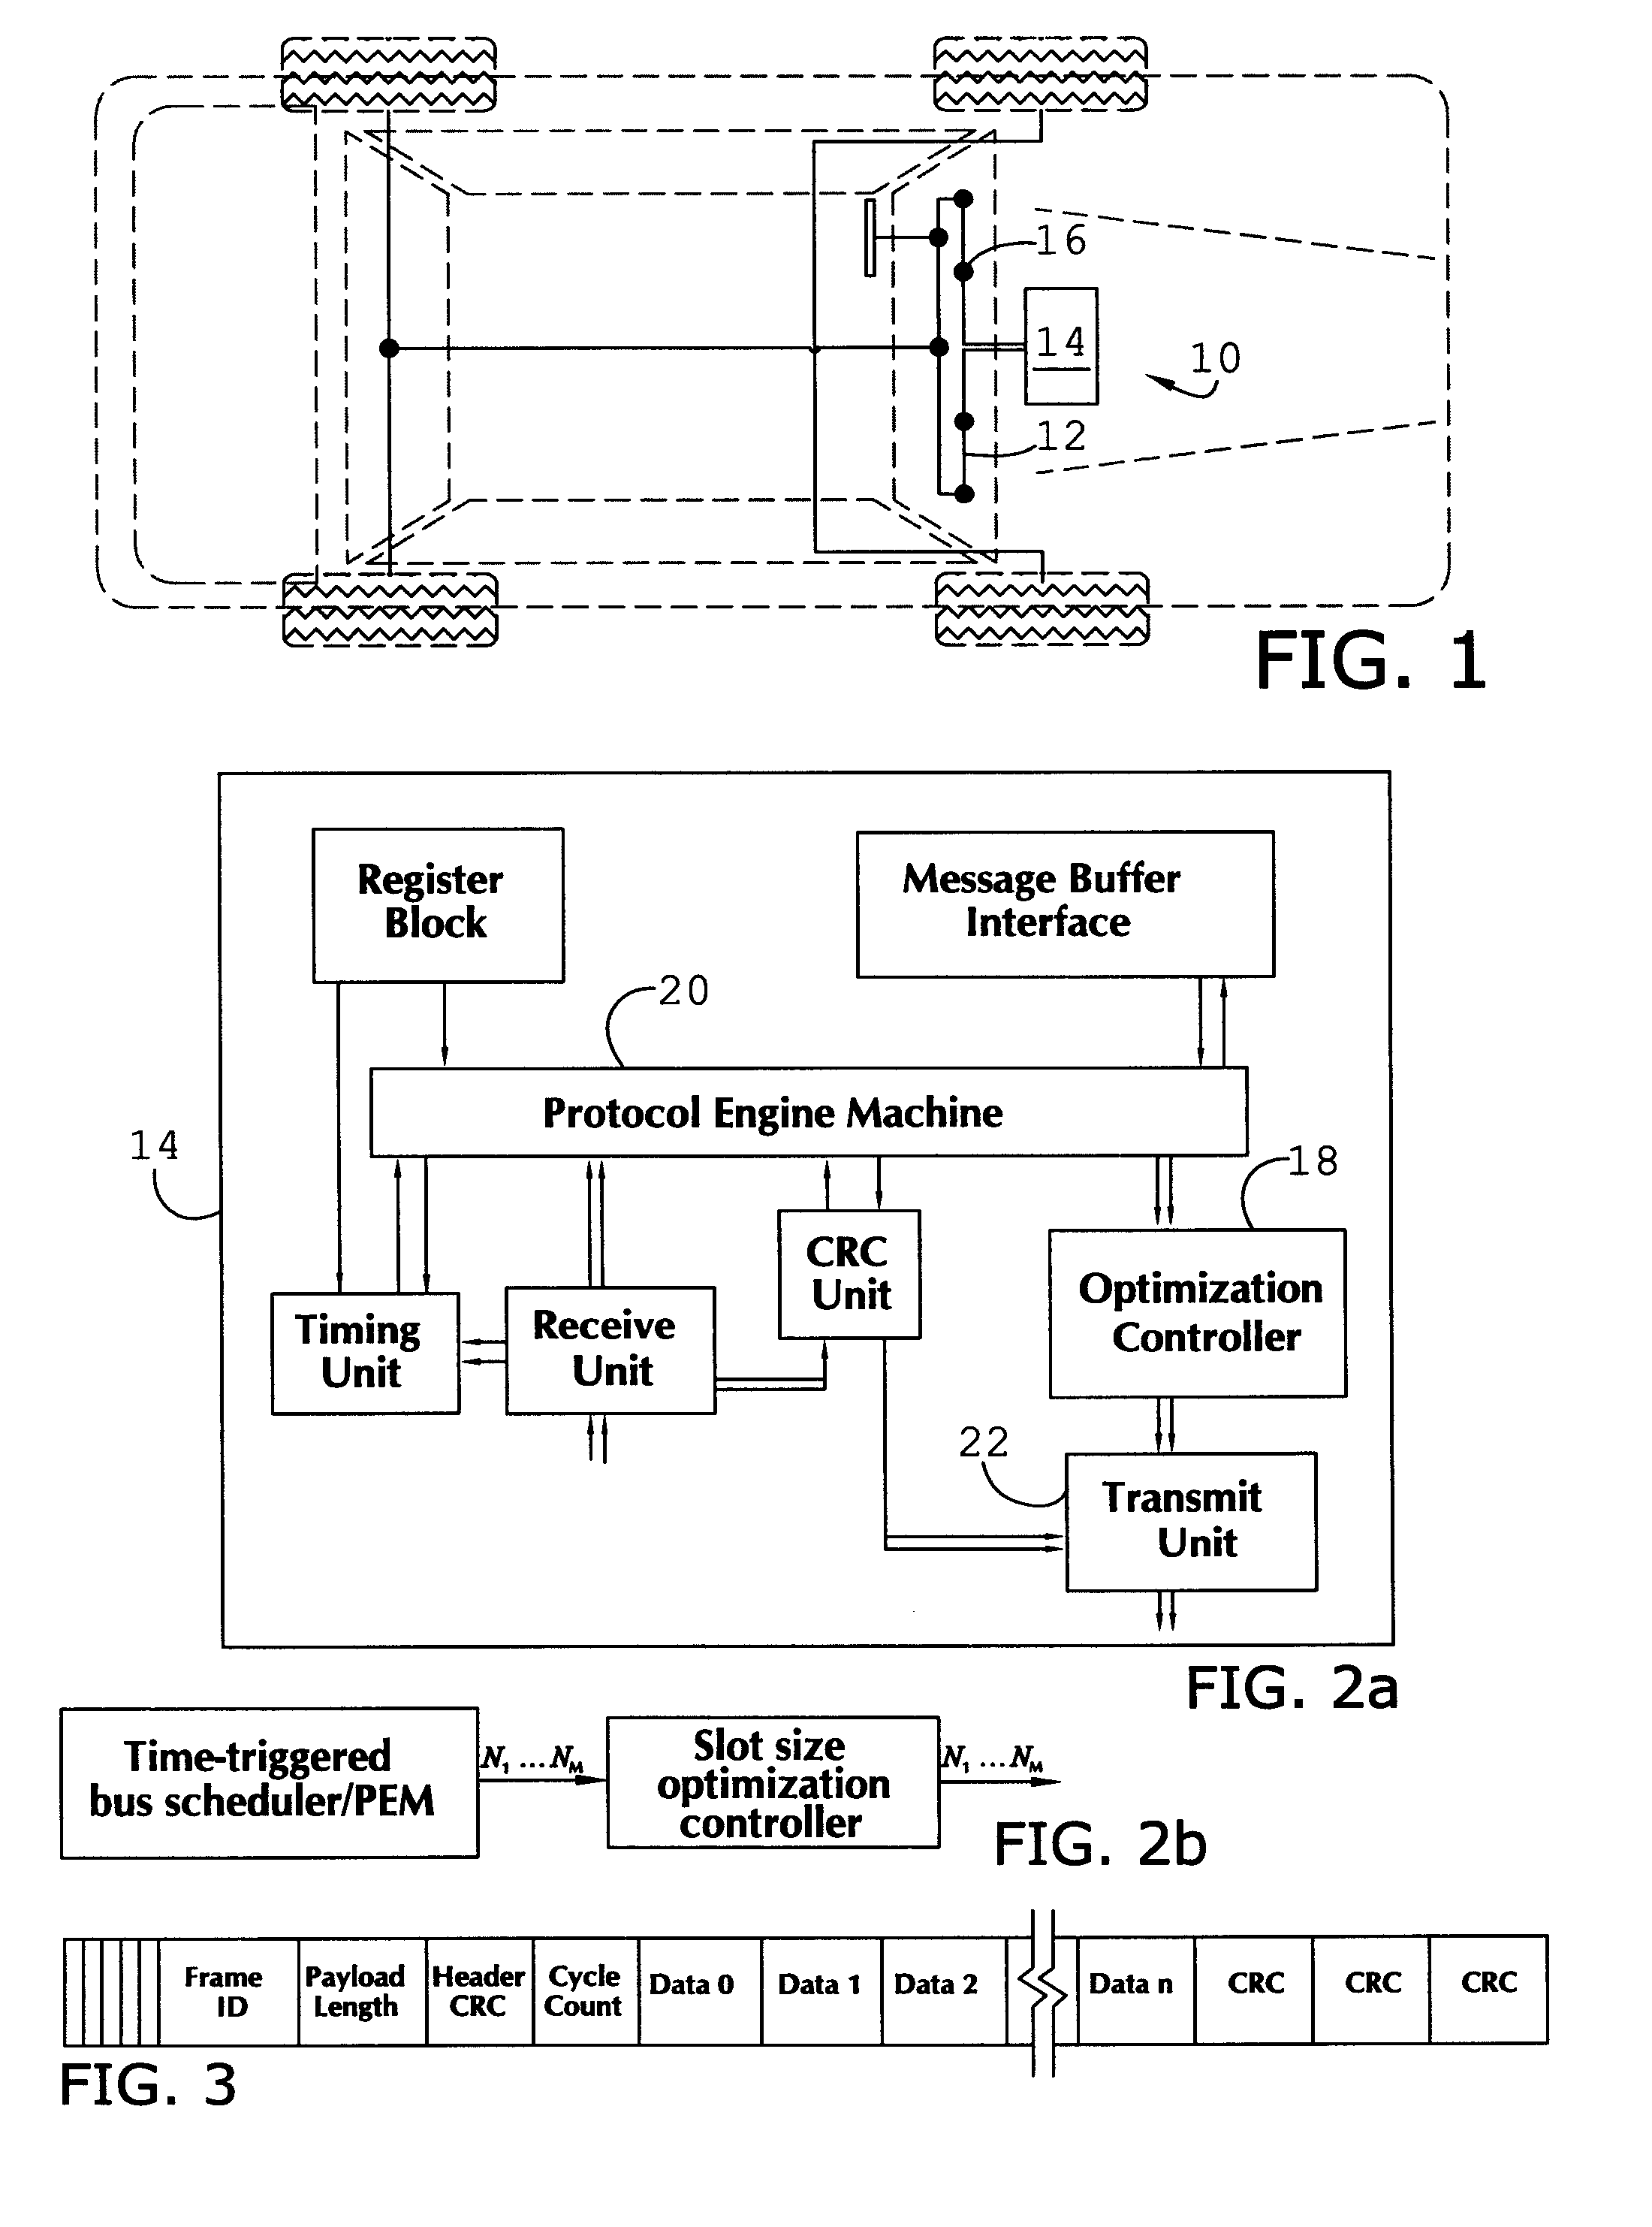 System and Method of Optimizing the Static Segment Schedule and Cycle Length of a Time Triggered Communication Protocol